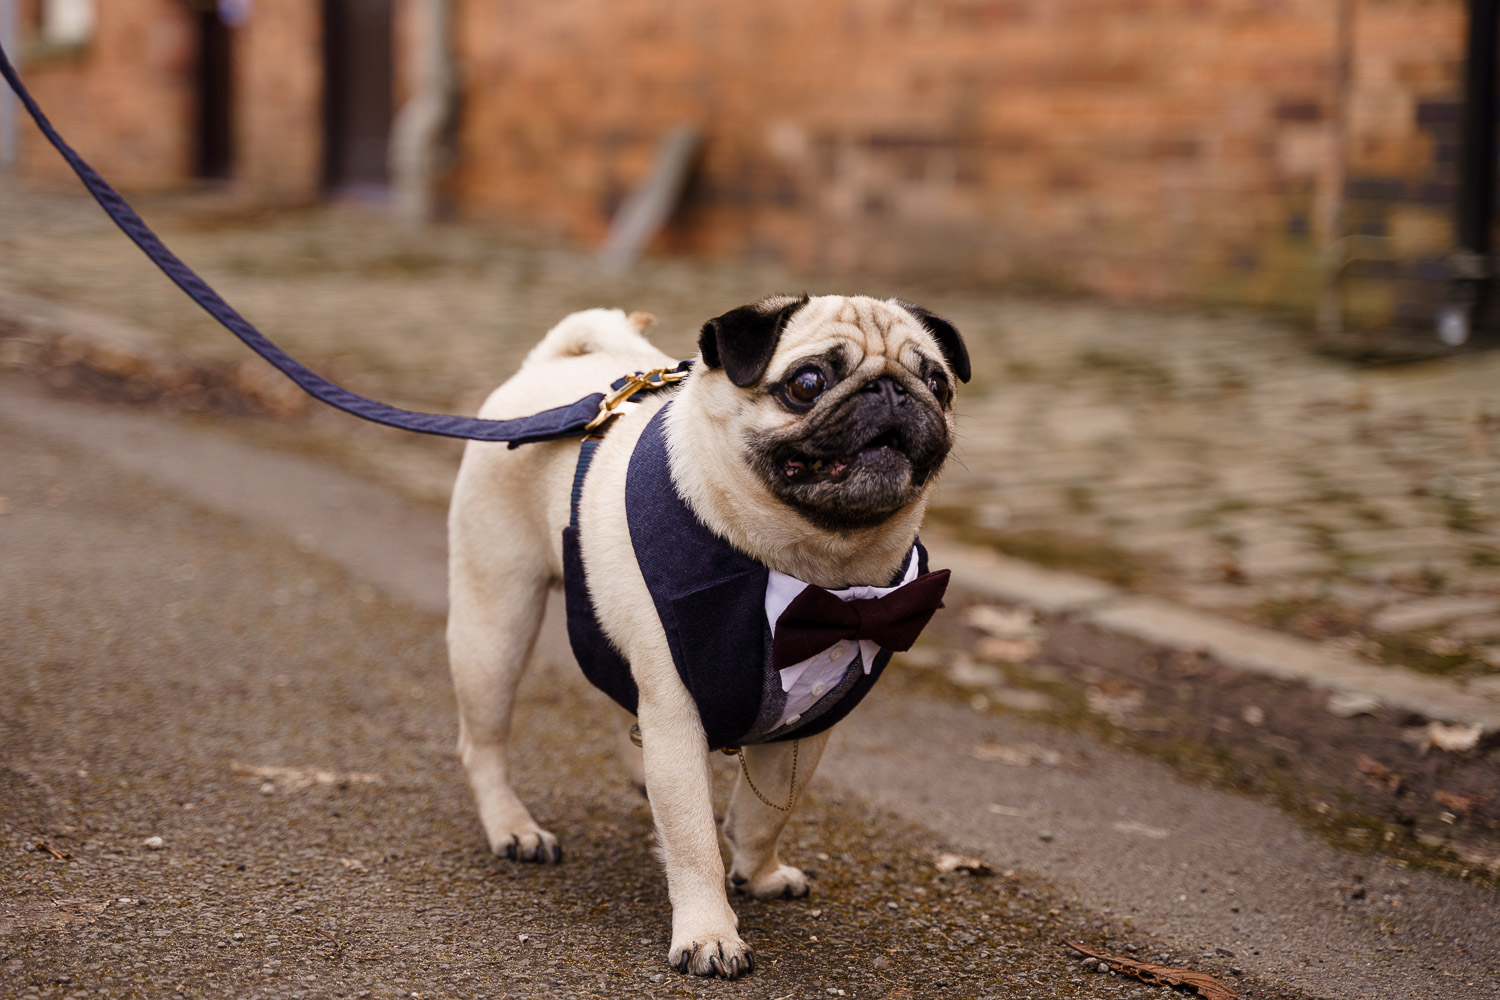 dog friendly wedding- dogs at weddings- katherine and her camera- dog wedding accessories-unconventional wedding- wedding planning advice- pets at weddings- pug in tuxedo